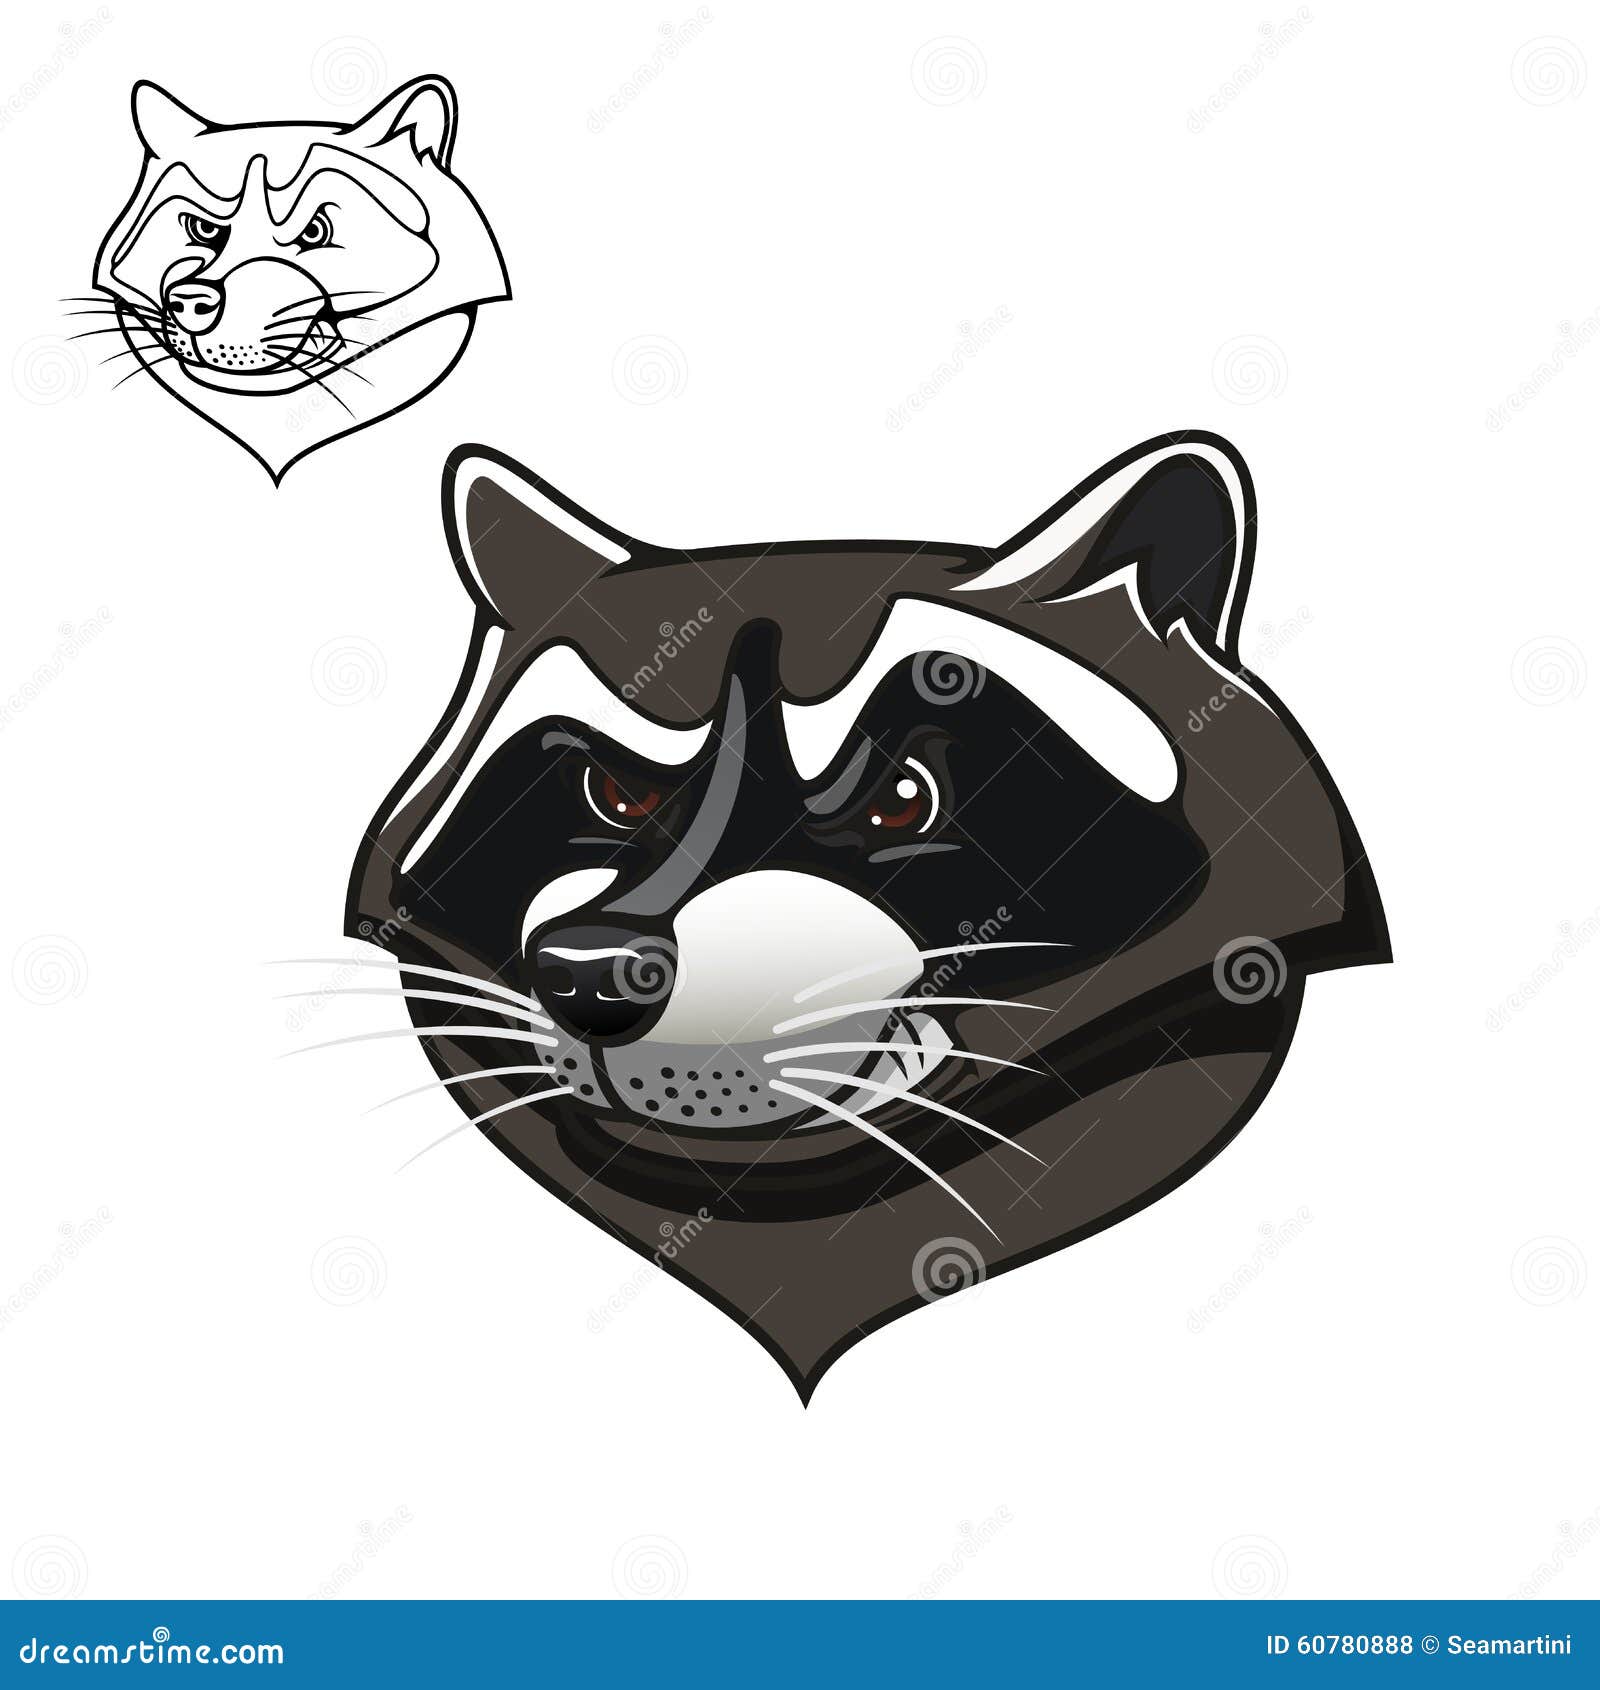 Raccoon Tattoo colored proposal by ArielAleXCo on DeviantArt